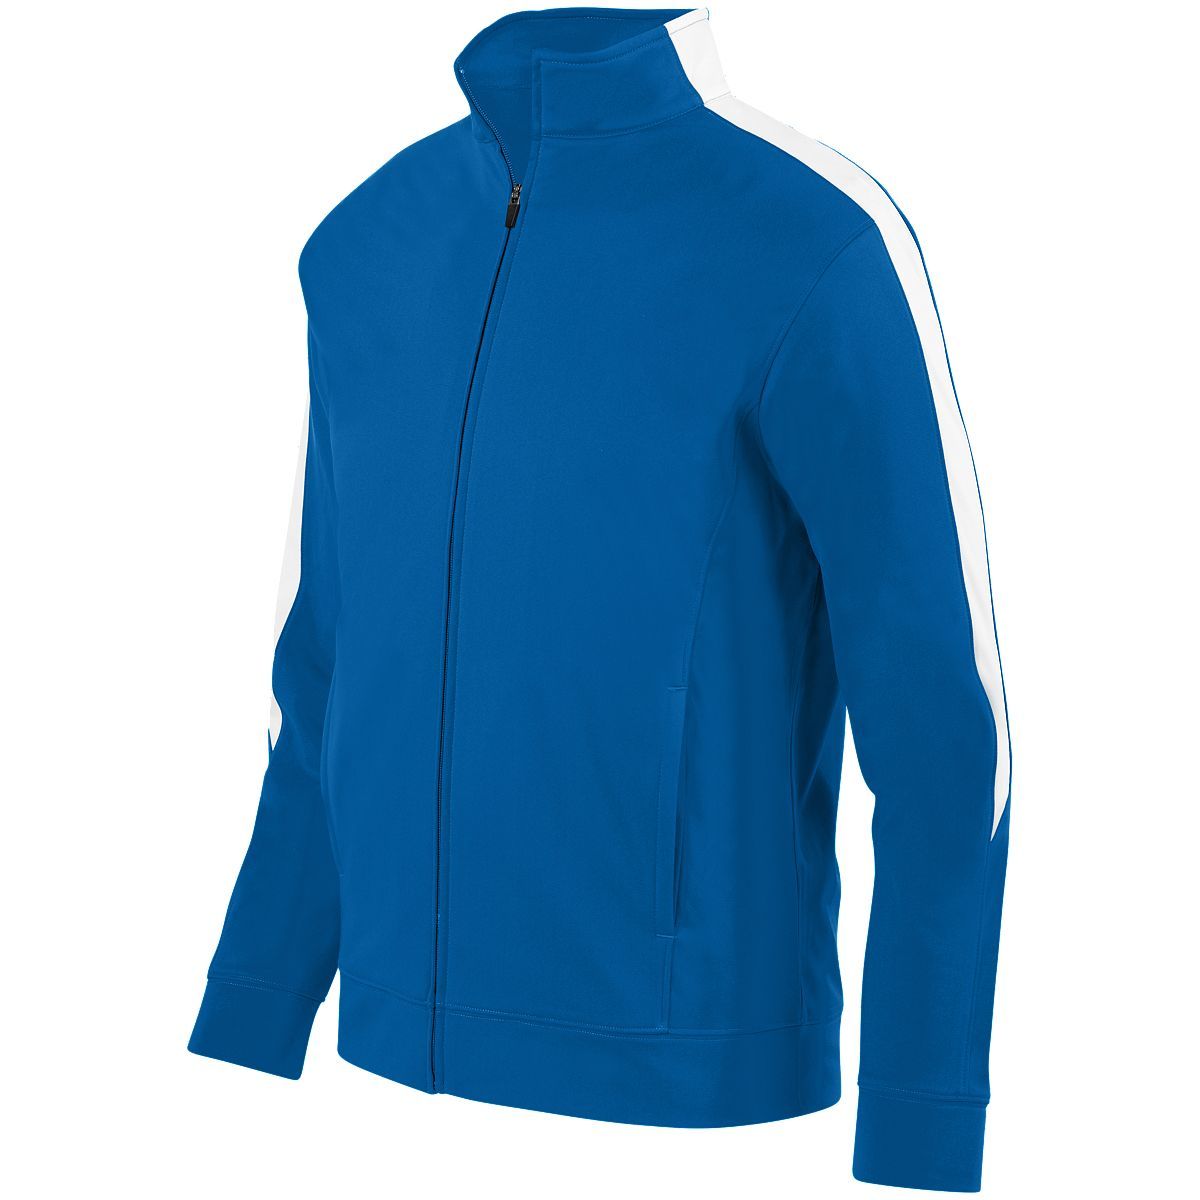 Augusta Sportswear Youth Medalist Jacket 2.0 in Royal/White  -Part of the Youth, Youth-Jacket, Augusta-Products, Outerwear product lines at KanaleyCreations.com